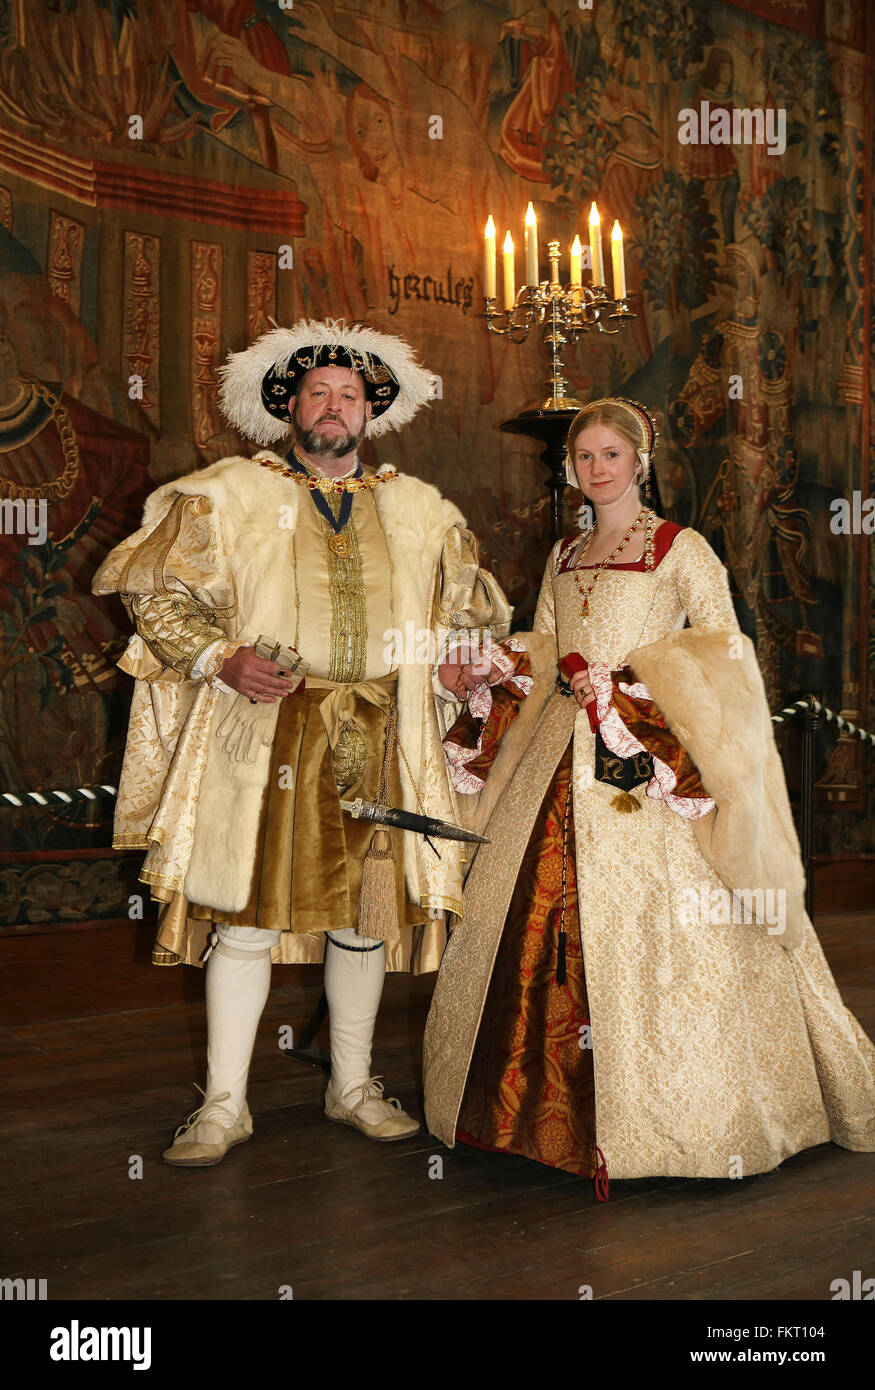 Hampton Court: Henry VIII with his sixth wife Catherine Parr,as played by actors Stock Photo